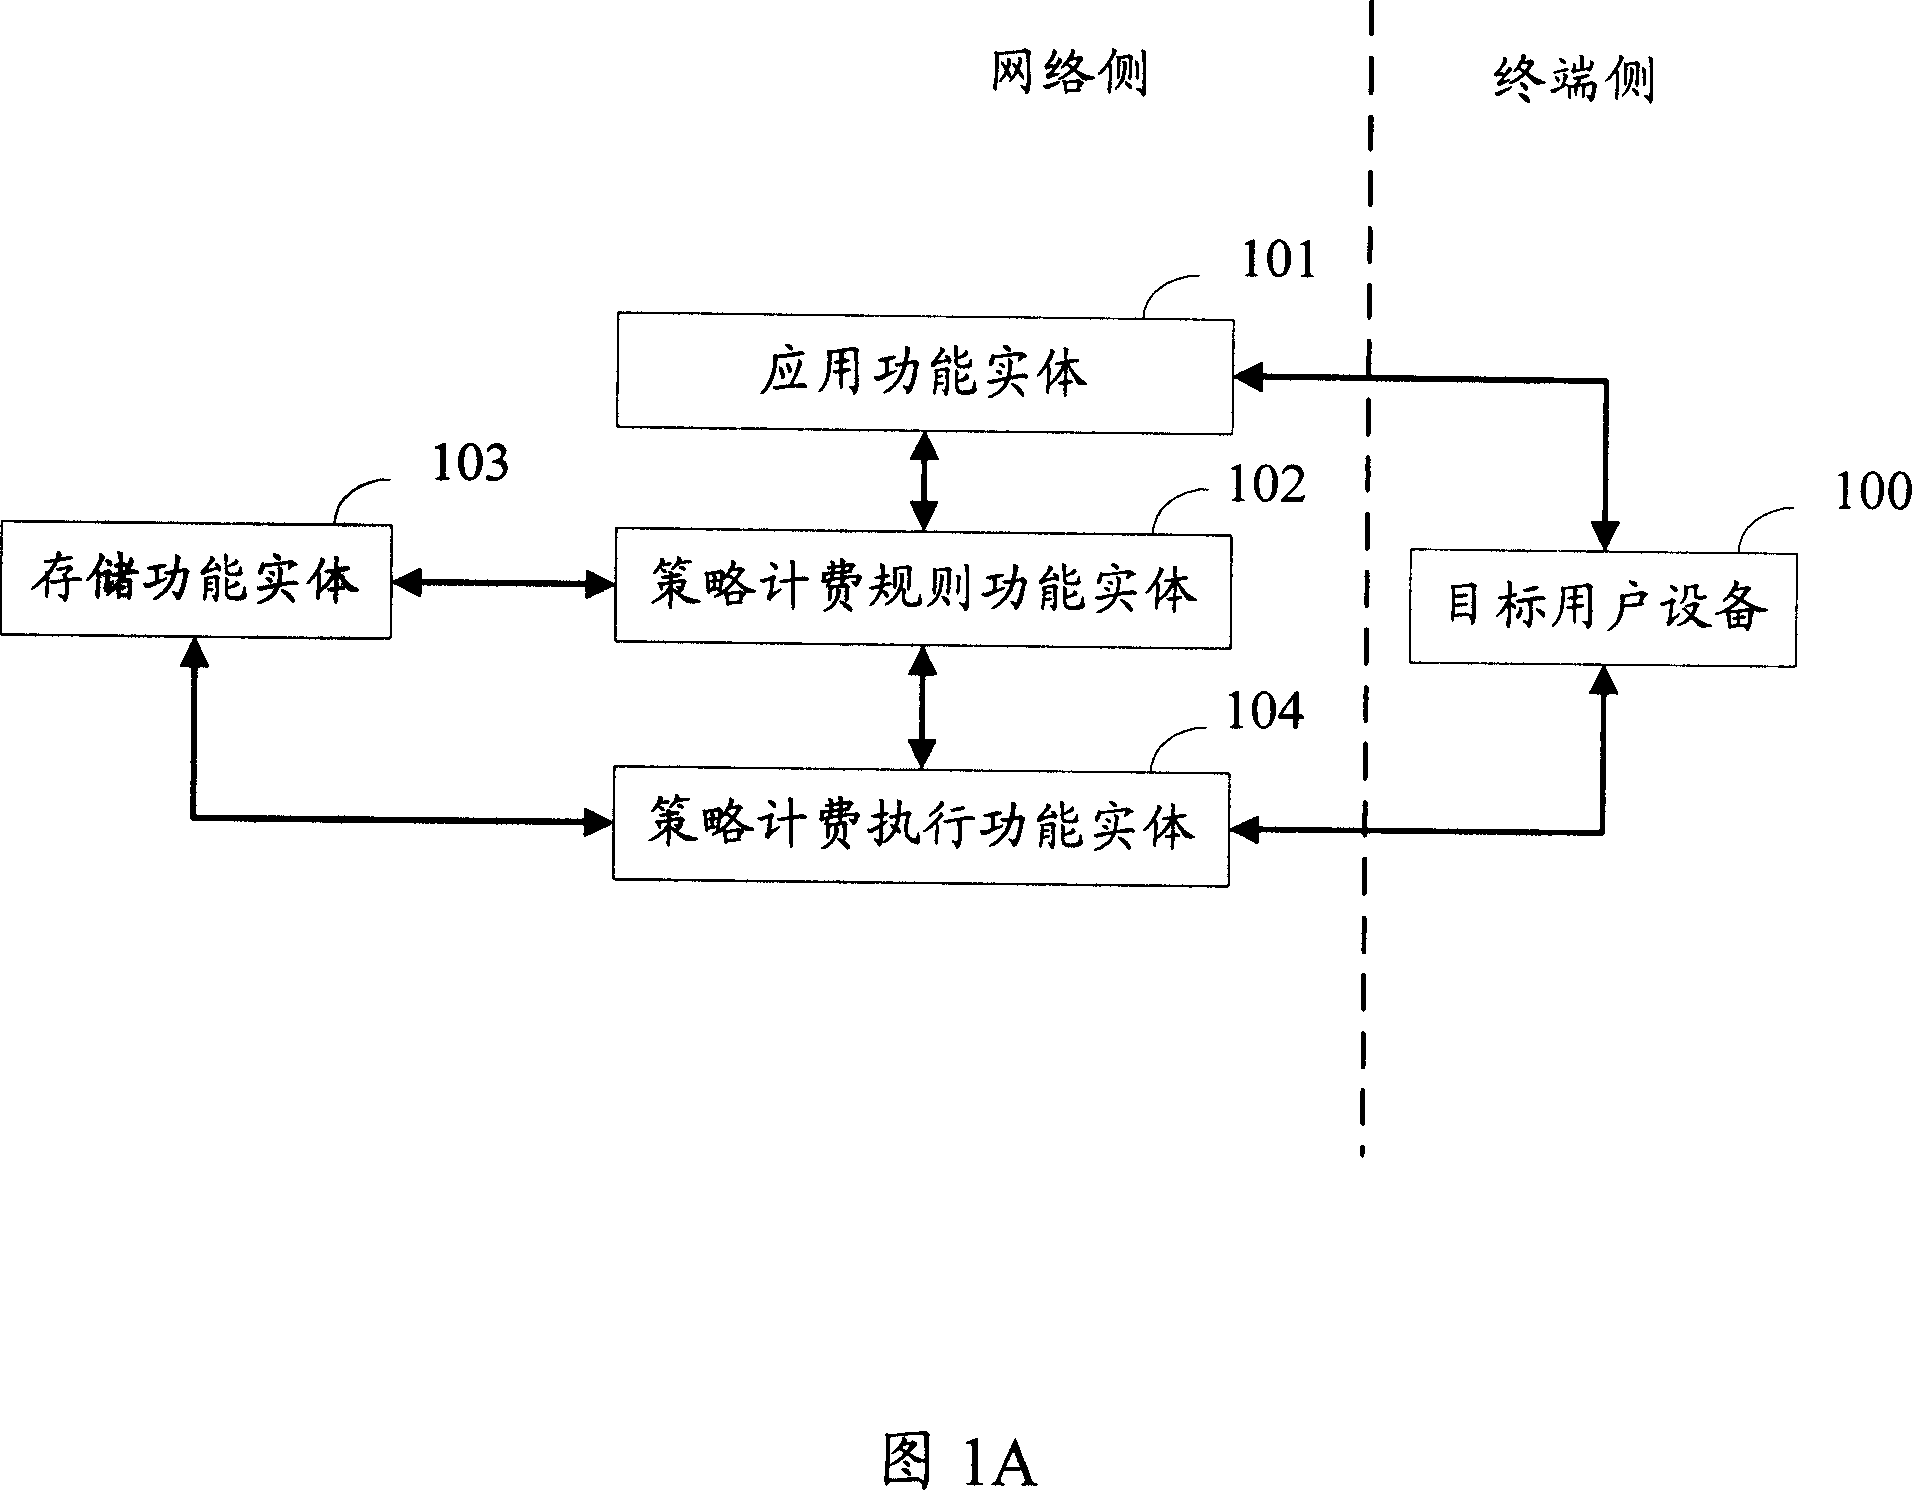 Method, device and system for strategy control